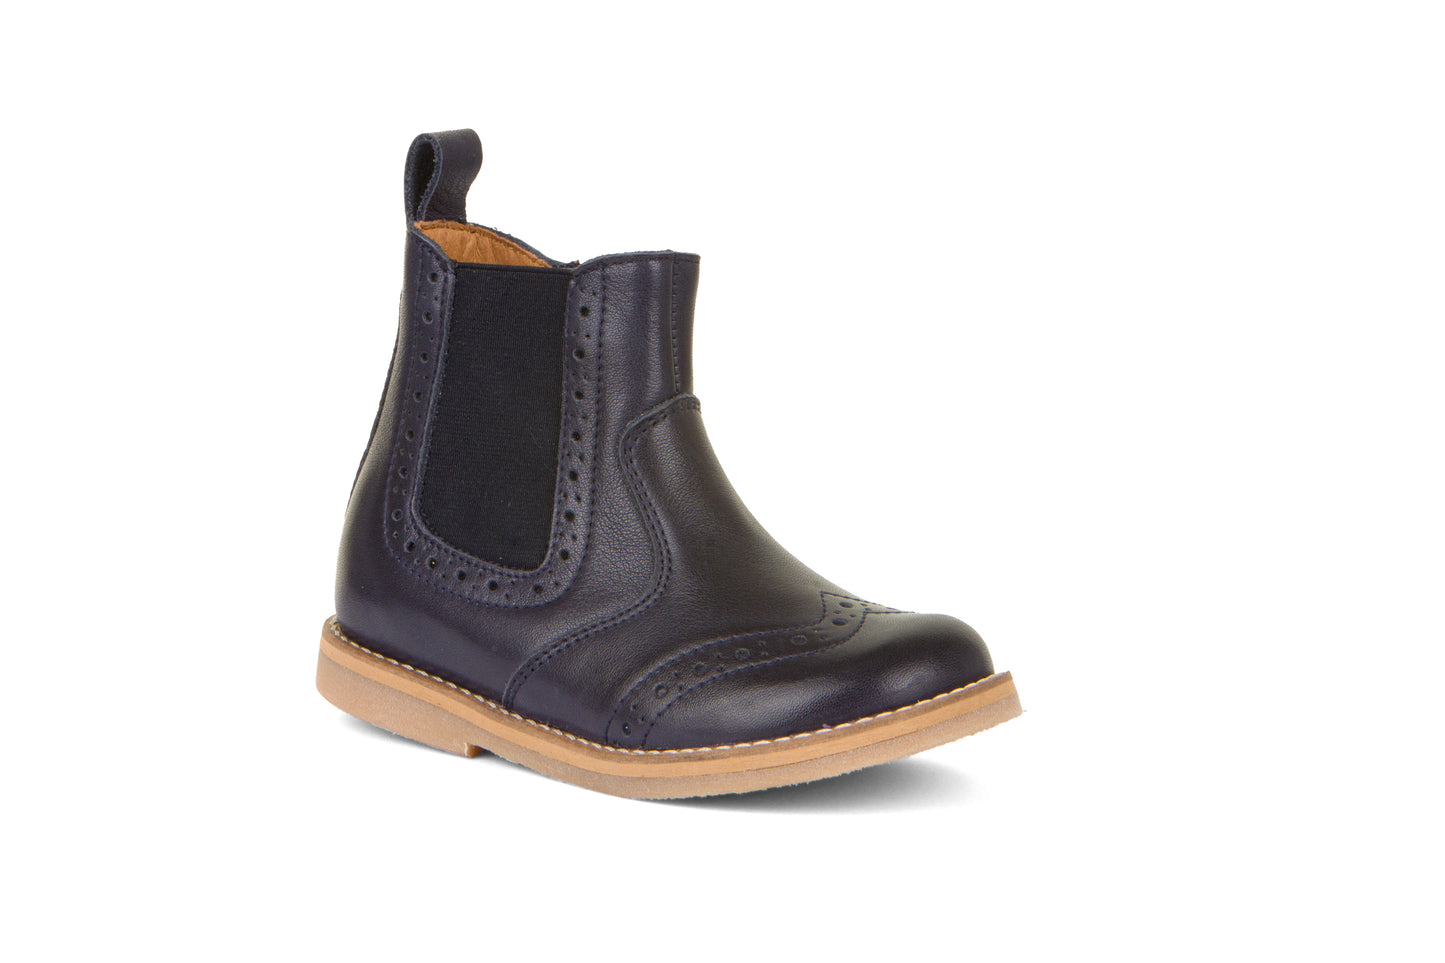 Chelys Brogue Leather Chelsea Boot in Dark Blue